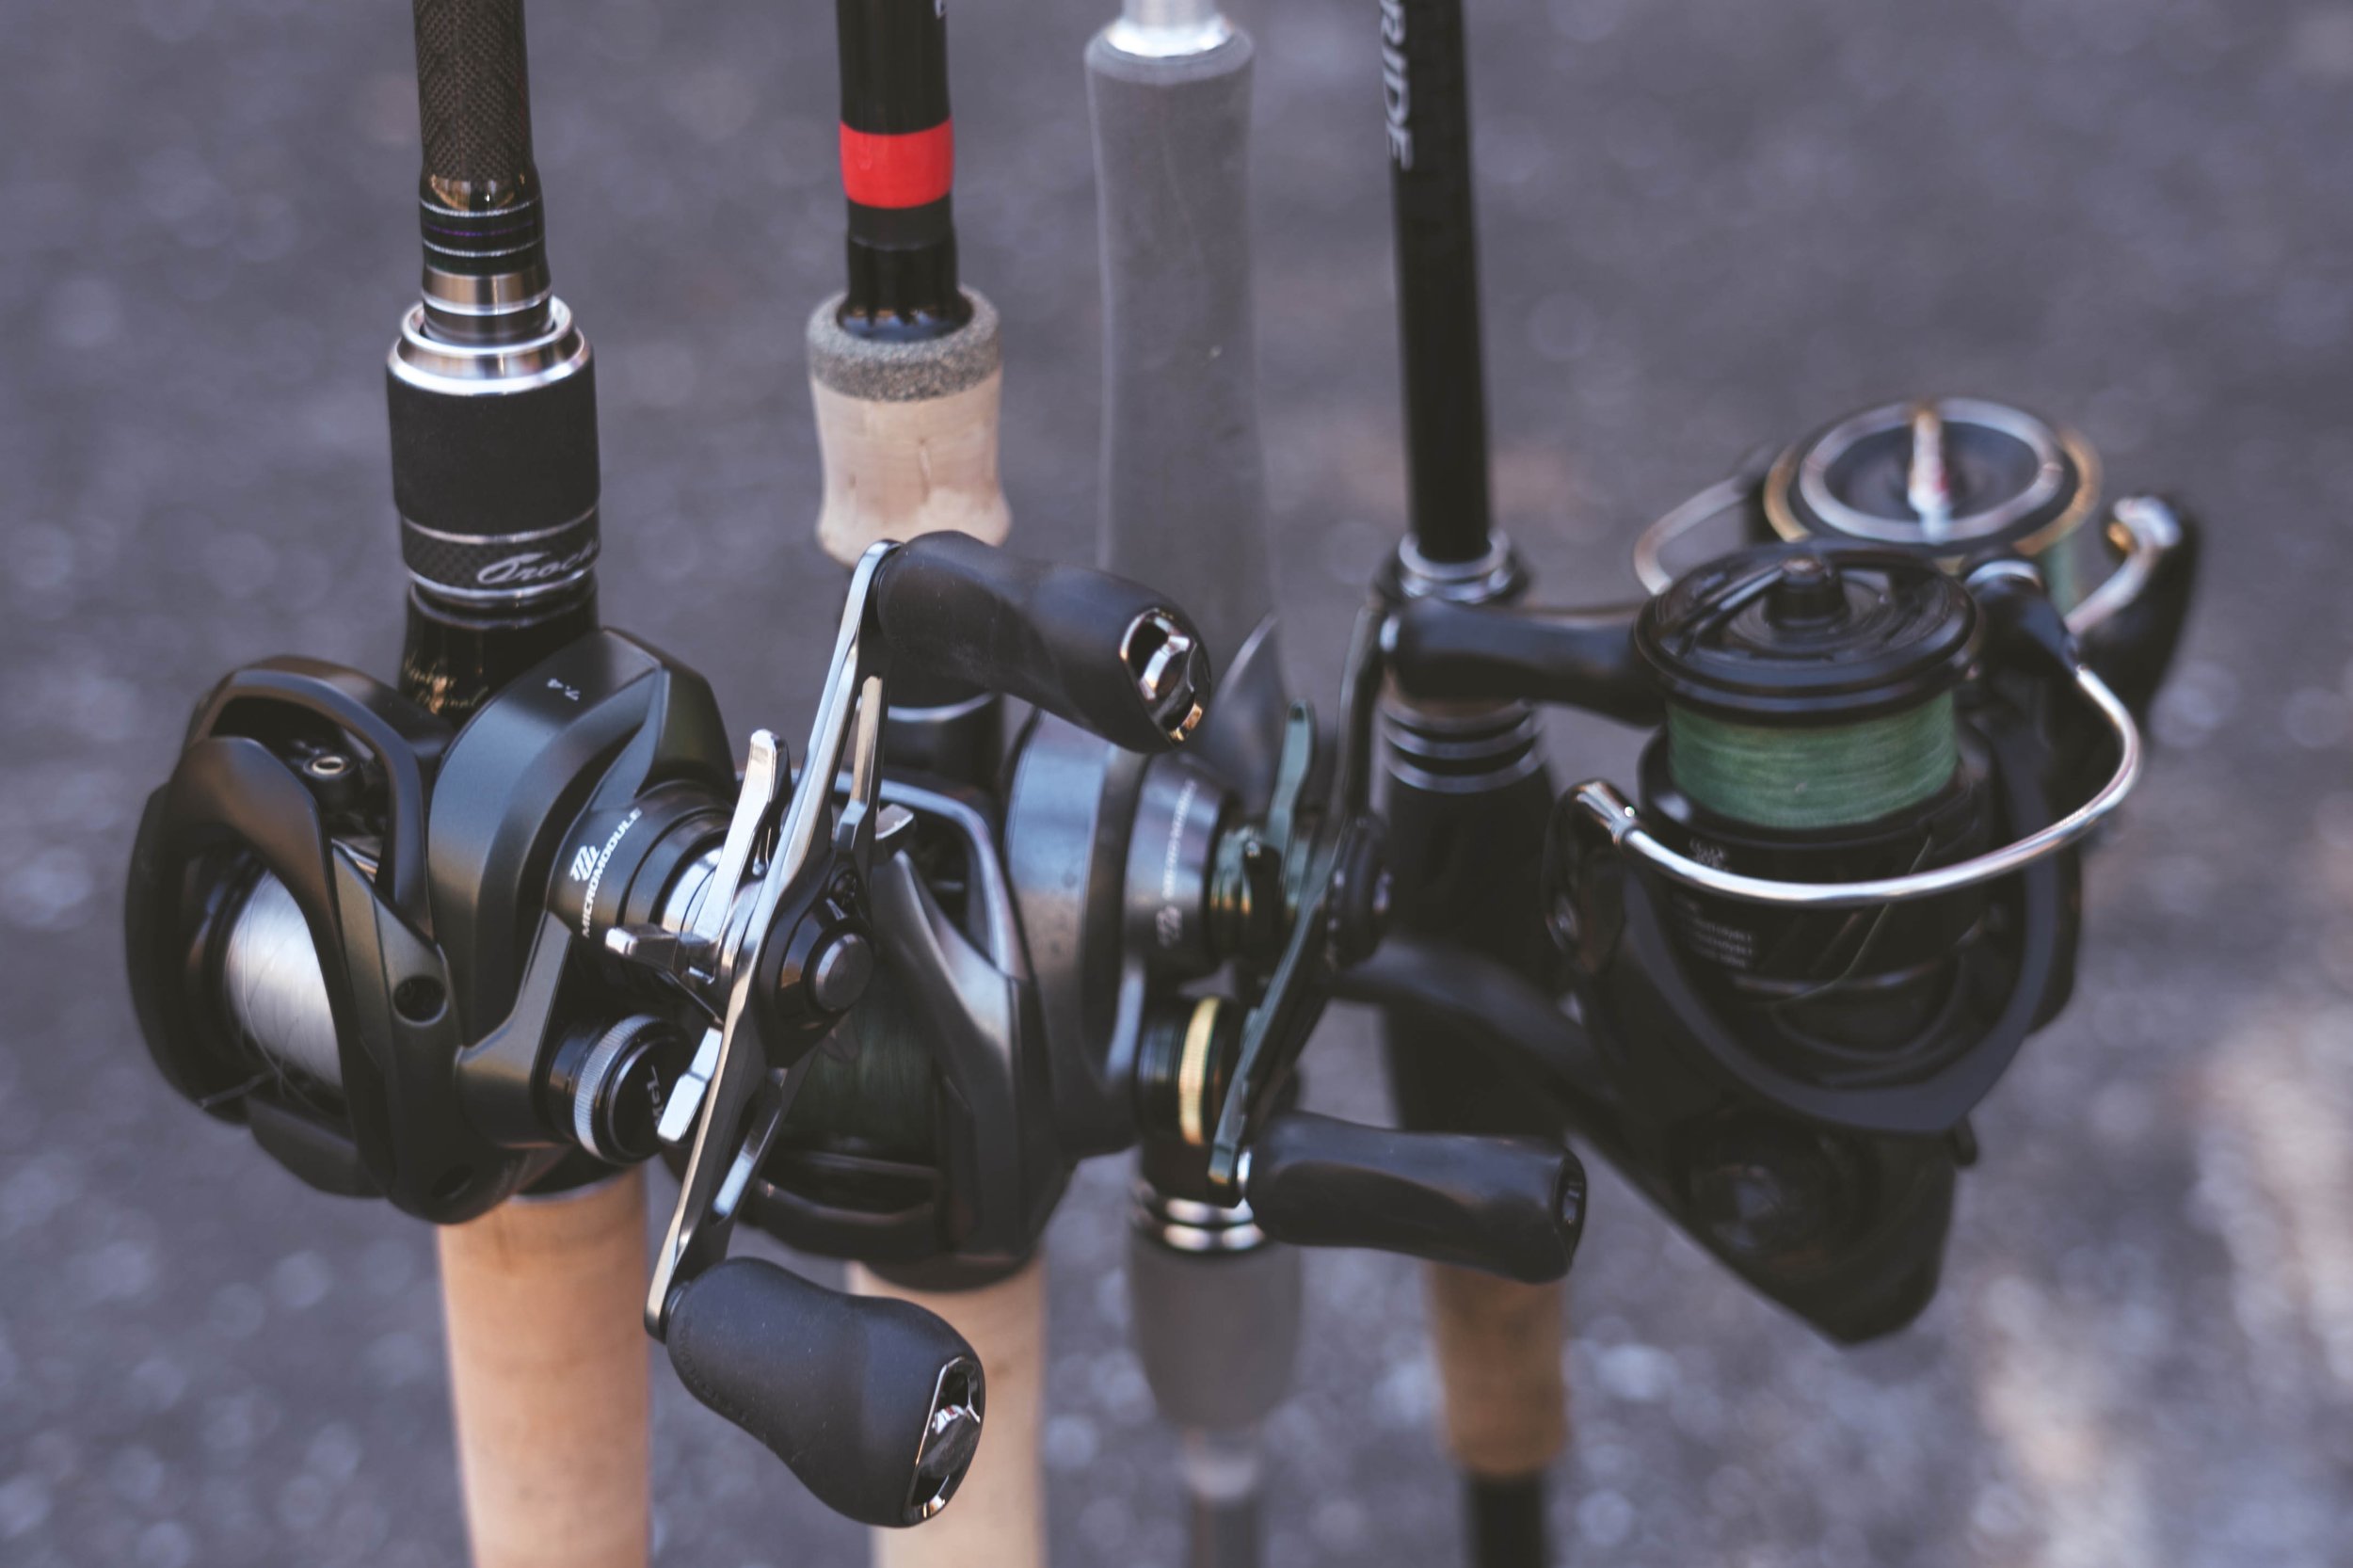 2022 Buyer's Guide: Best $100 Rod And Reel Combos! — Tactical